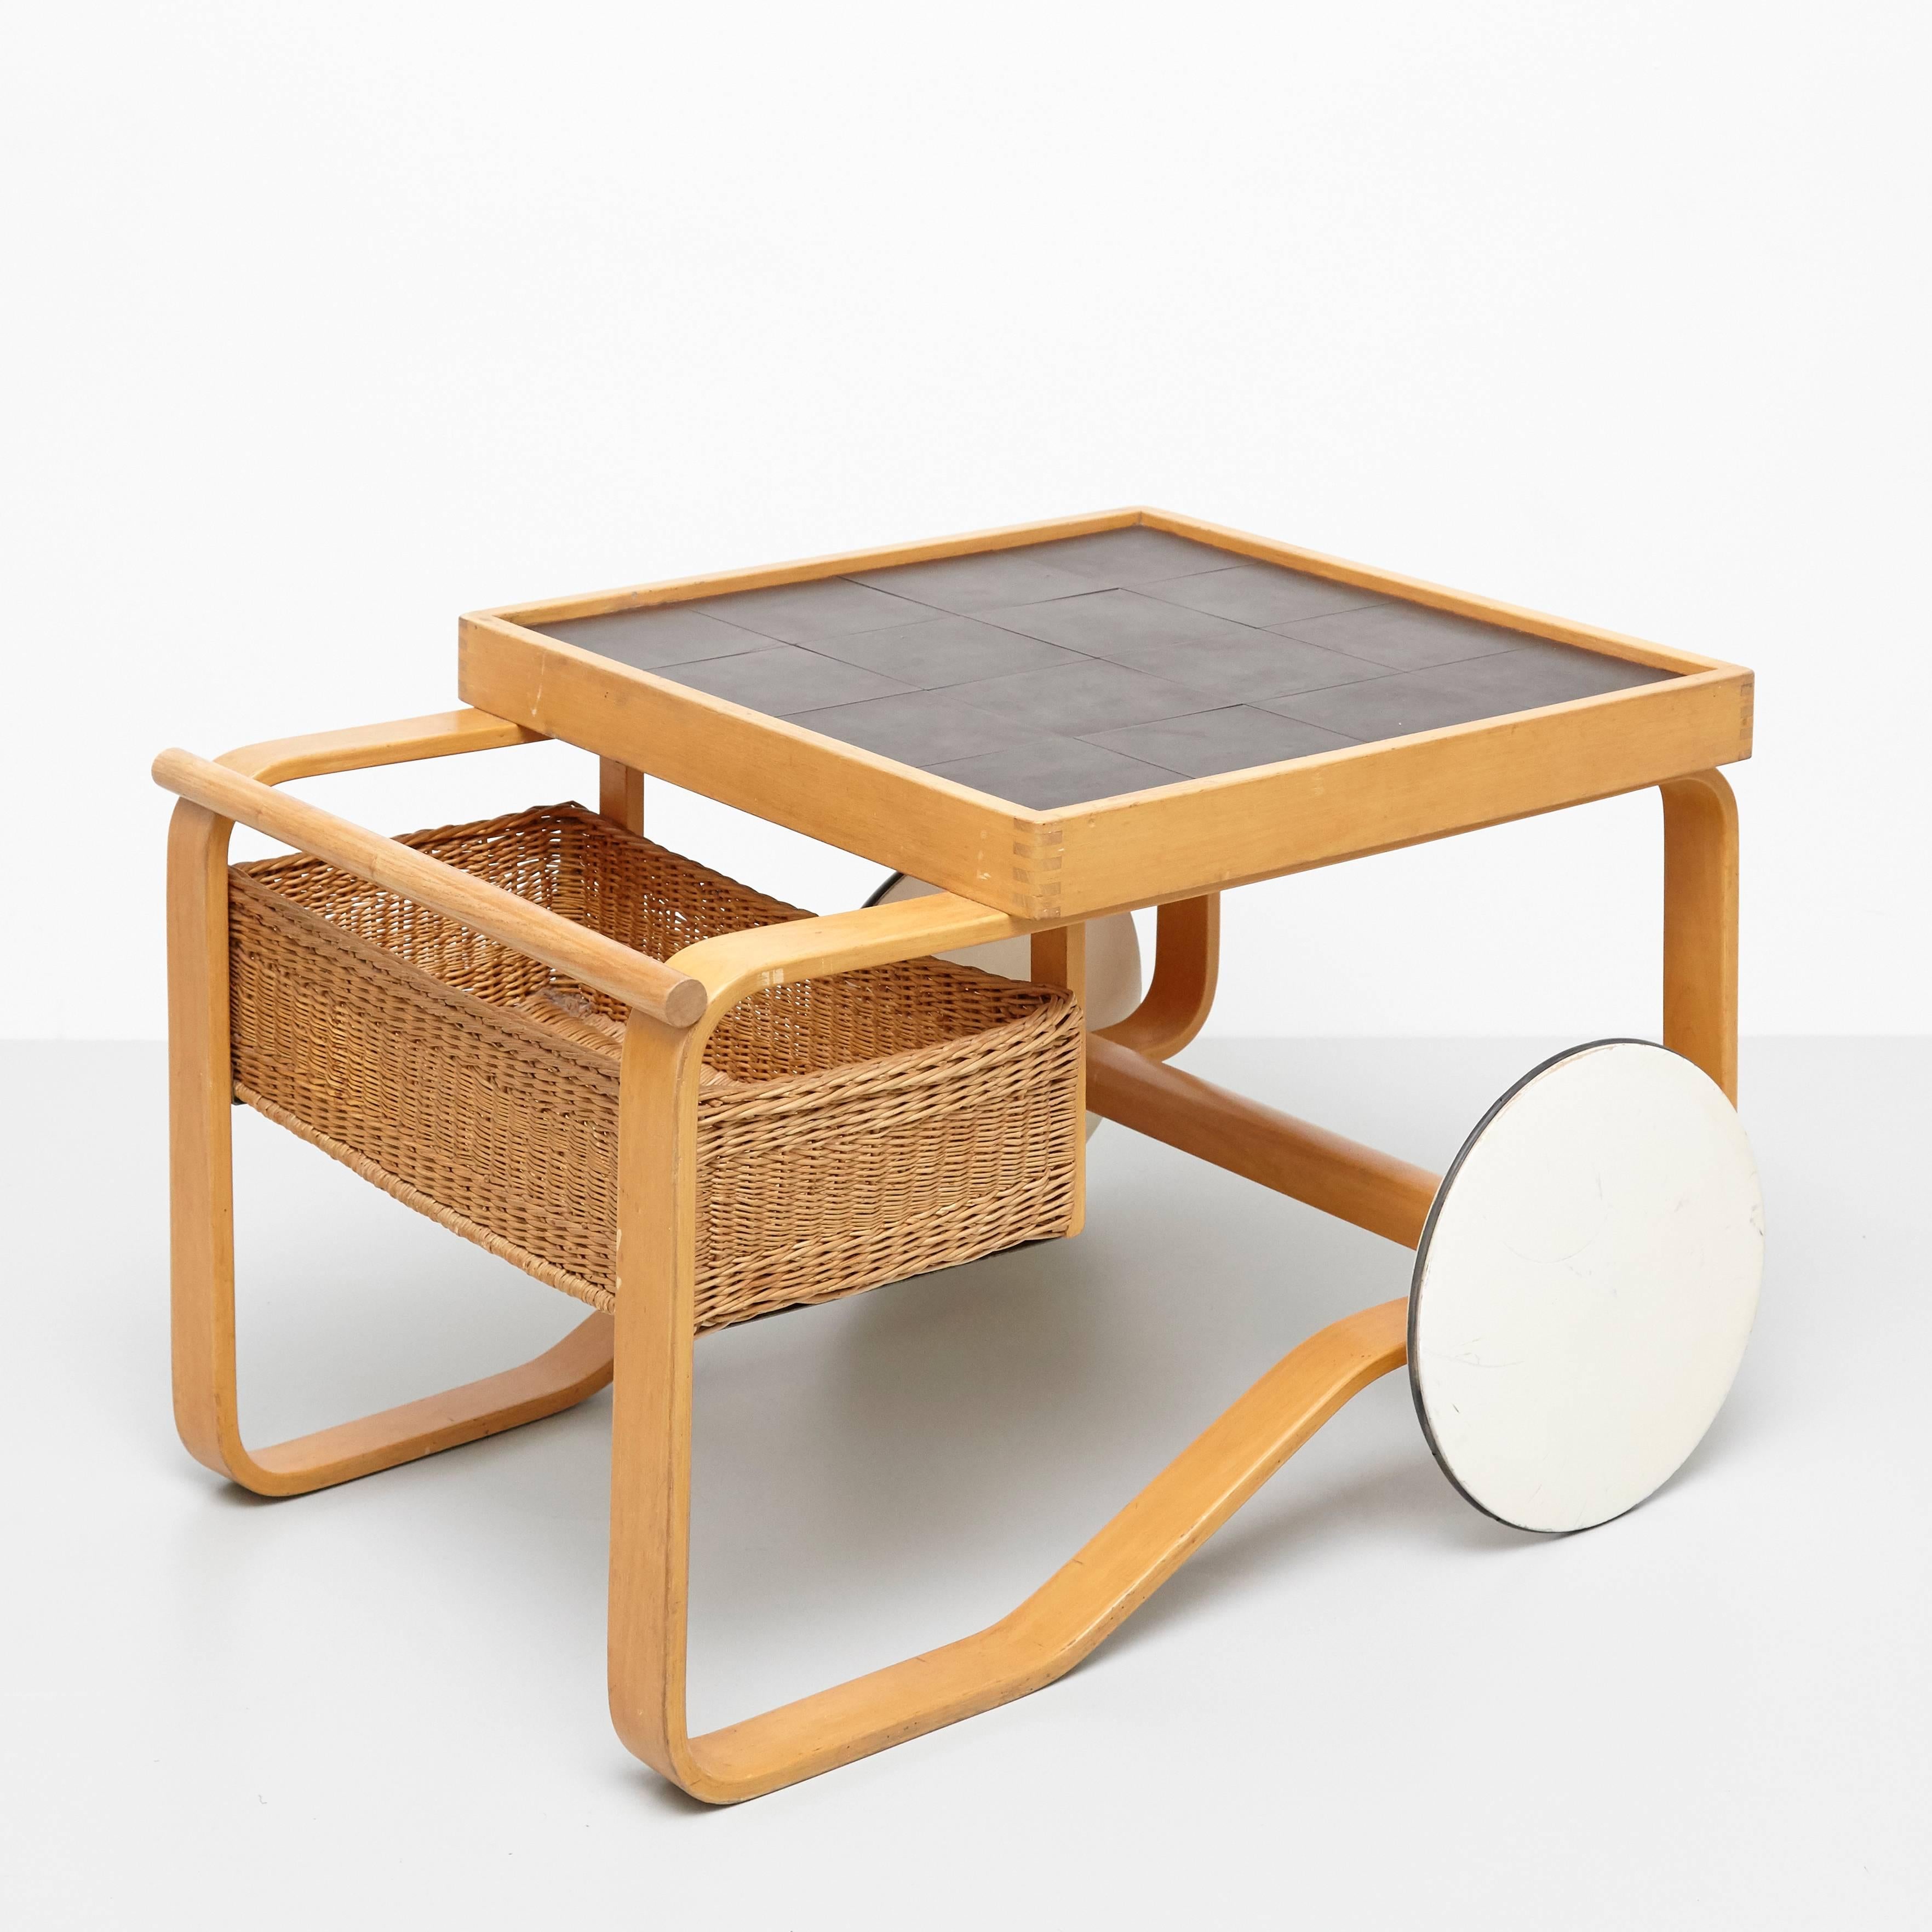 Tea trolley model 900, designed by Alvar Aalto for Artek, Finland, 1935. 

Birch, ceramic tiles and cane.

Measures: 64 x 91 x 59 cm

In great original condition, with minor wear consistent with age and use, preserving a beautiful patina.